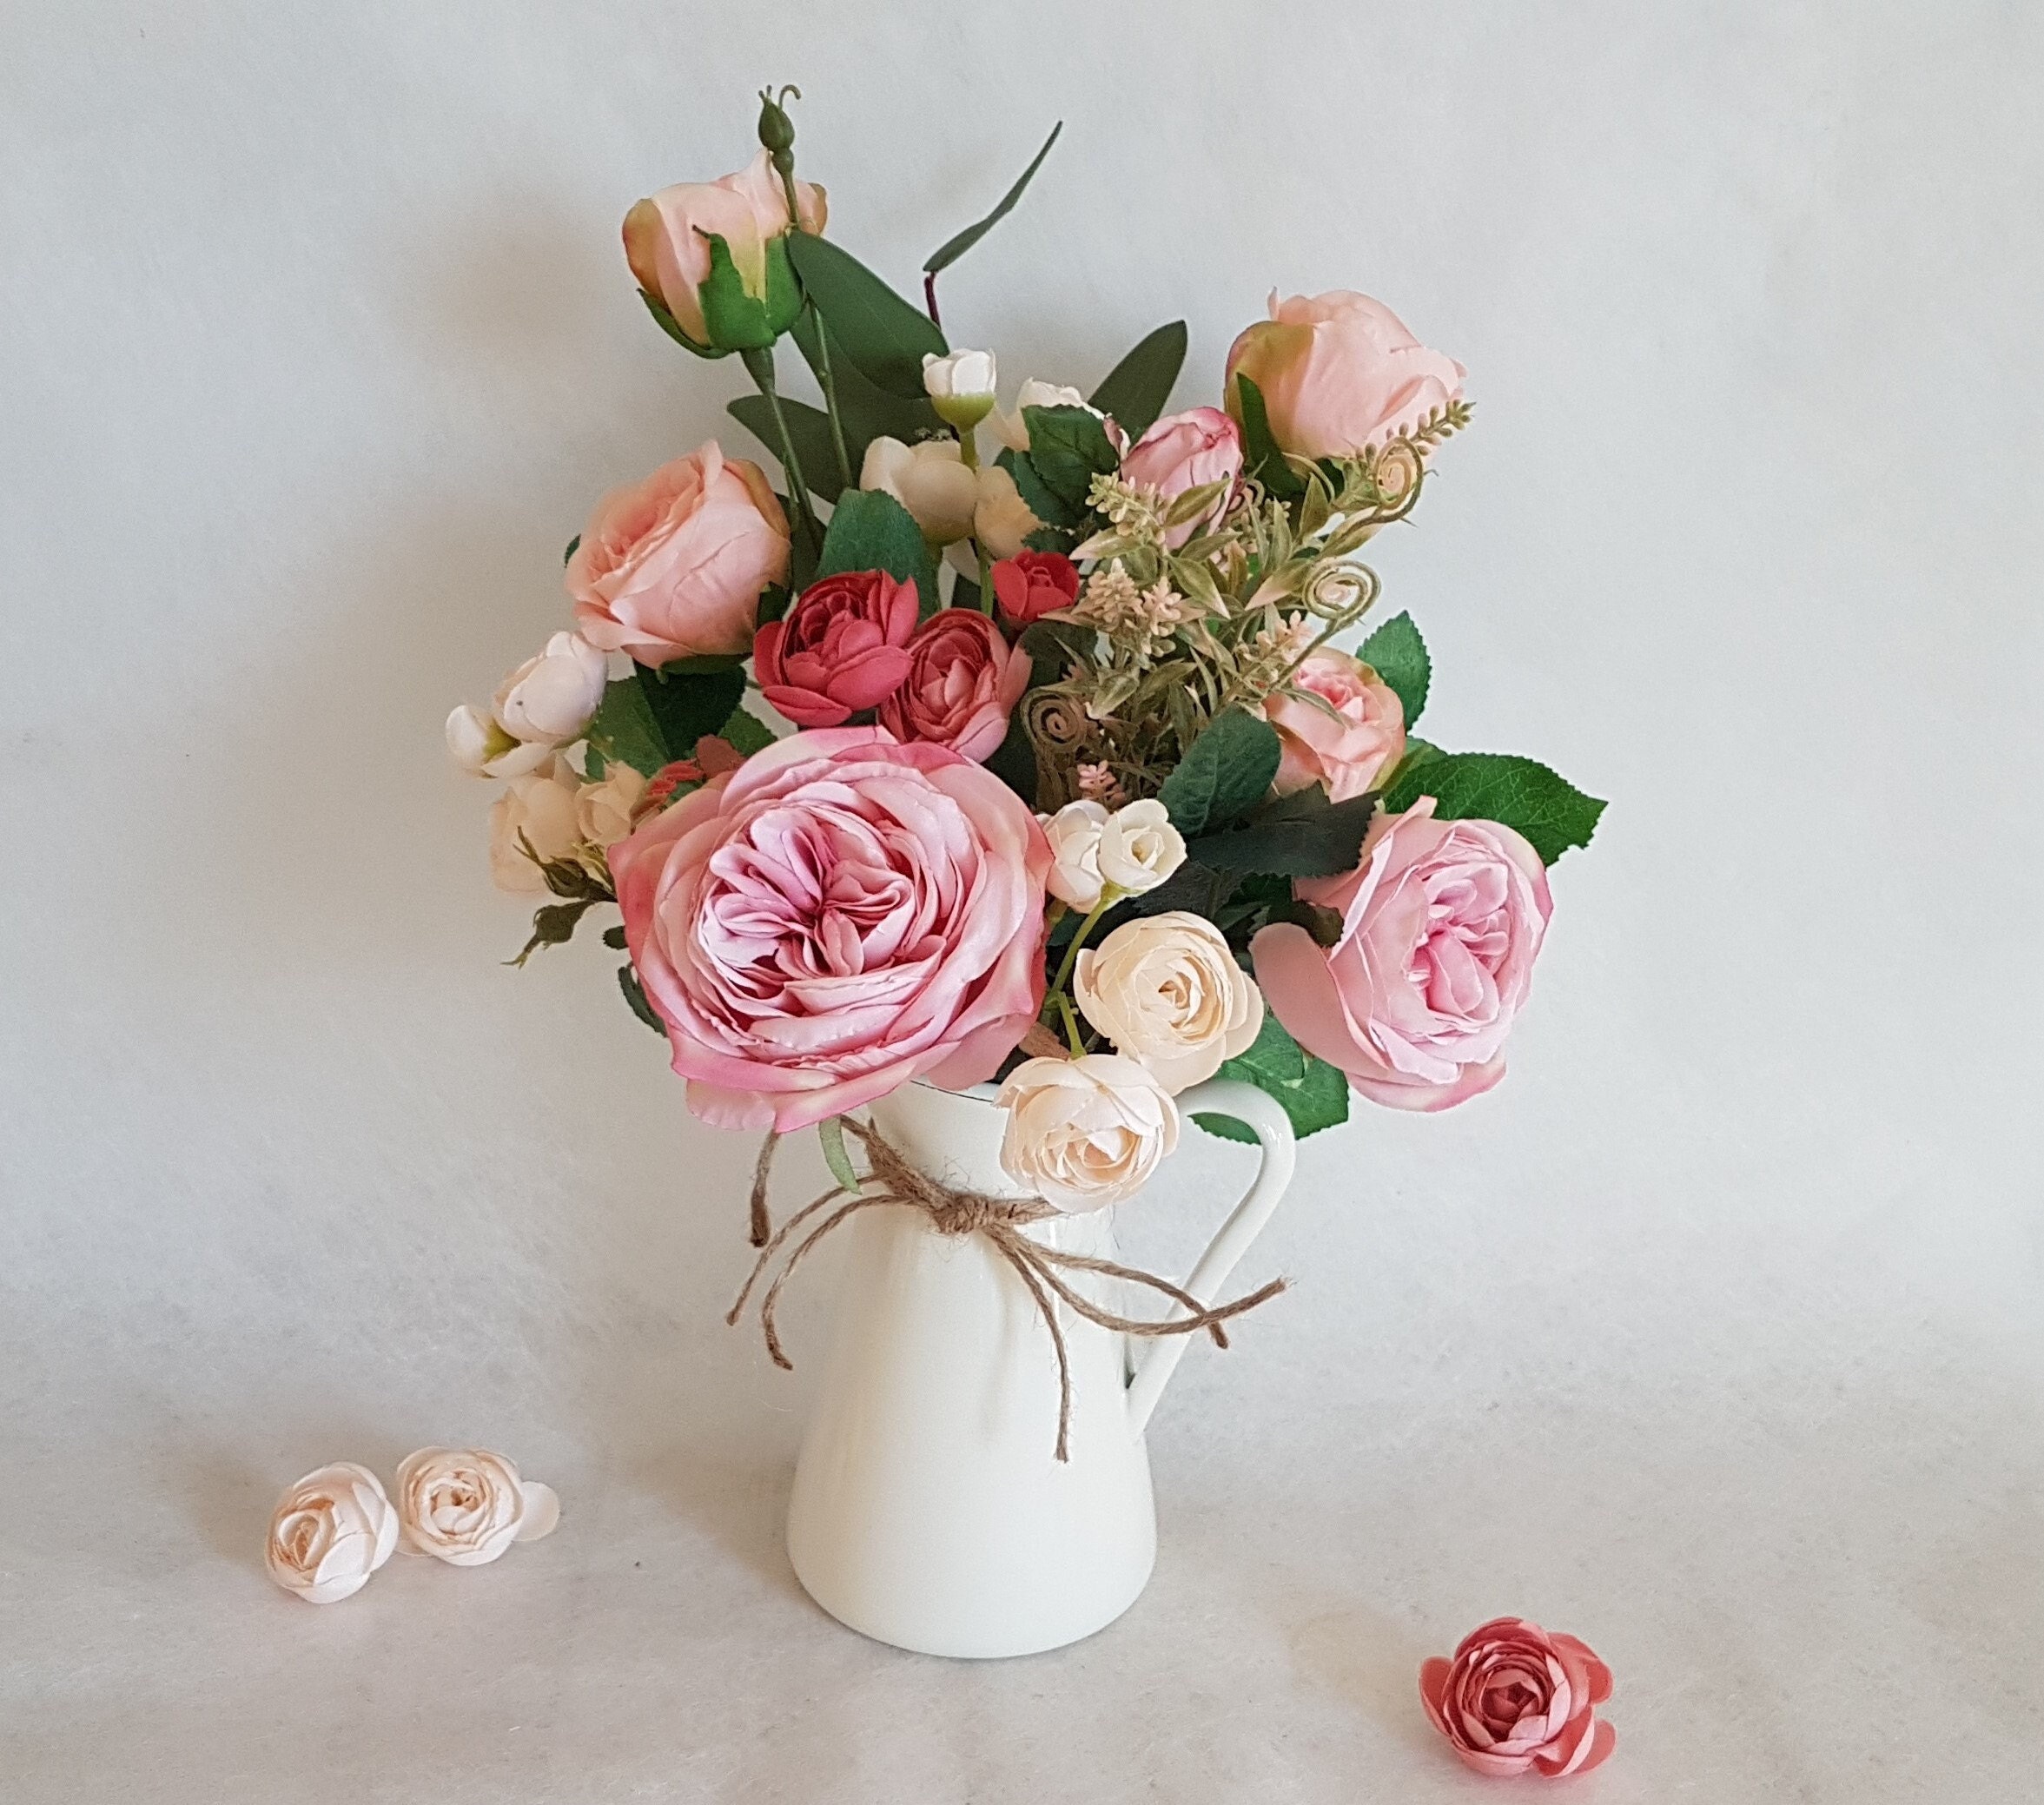 Pretty Vase of Artificial Flowers in Small White Ceramic Jug Floral  Arrangement Pink Peach Yellow Green Faux Flowers Country Style Pastel 